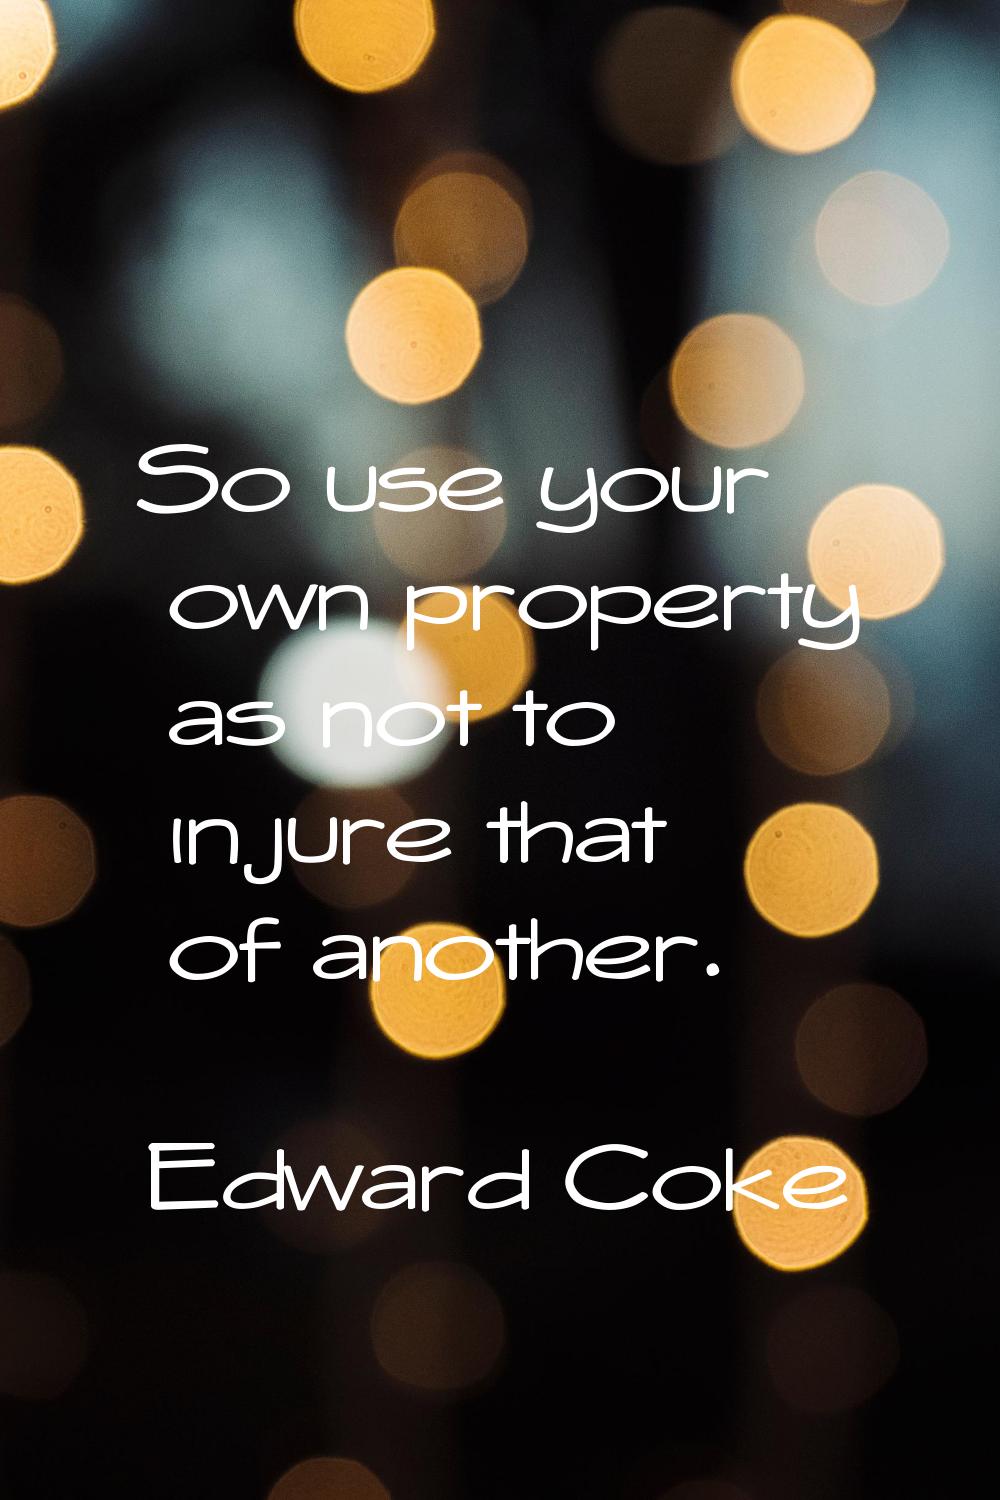 So use your own property as not to injure that of another.